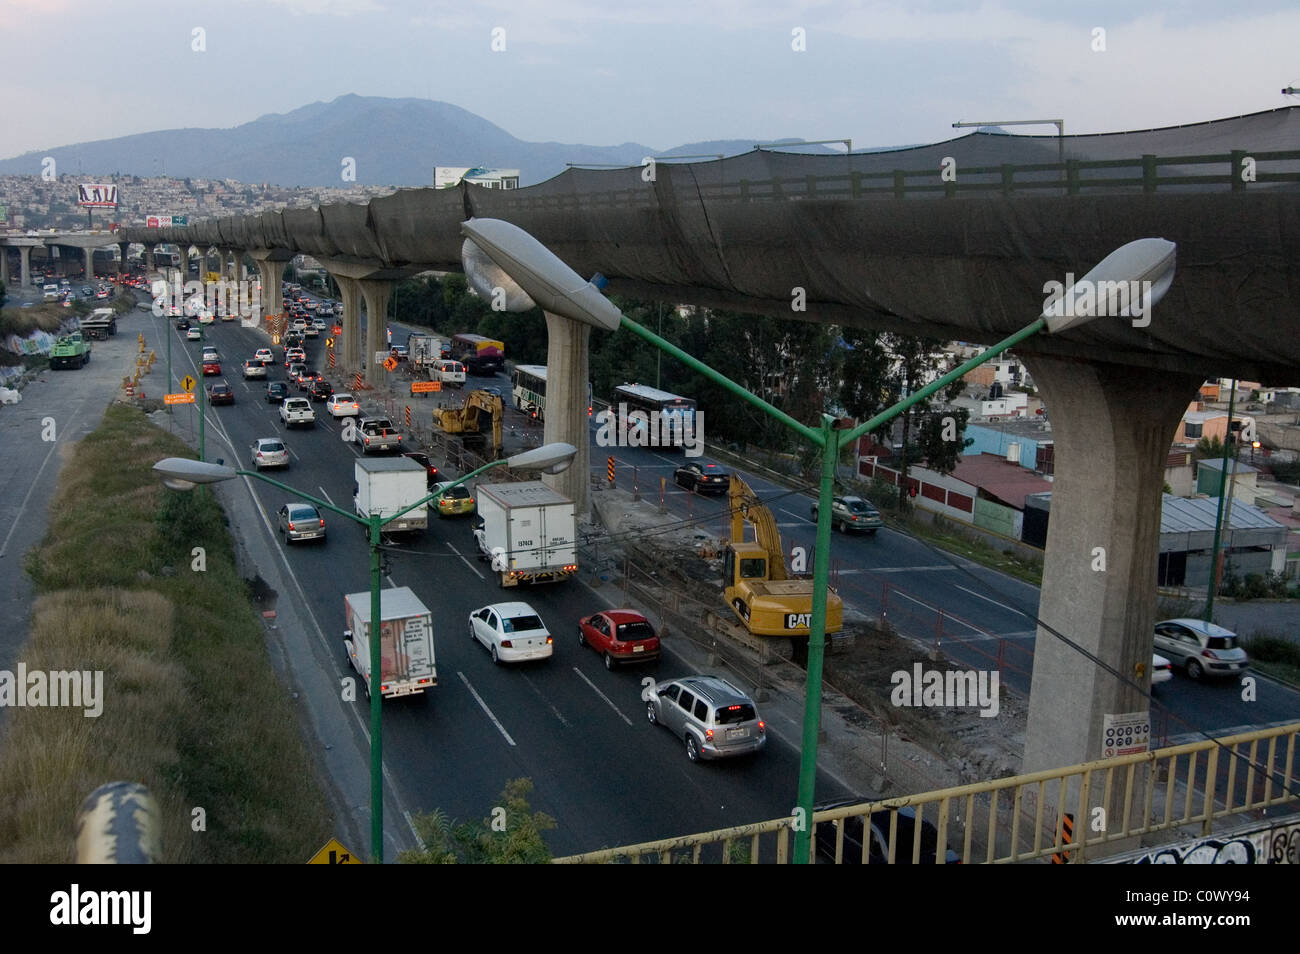 Traffic in Mexico beneath a viaduct under construction Stock Photo